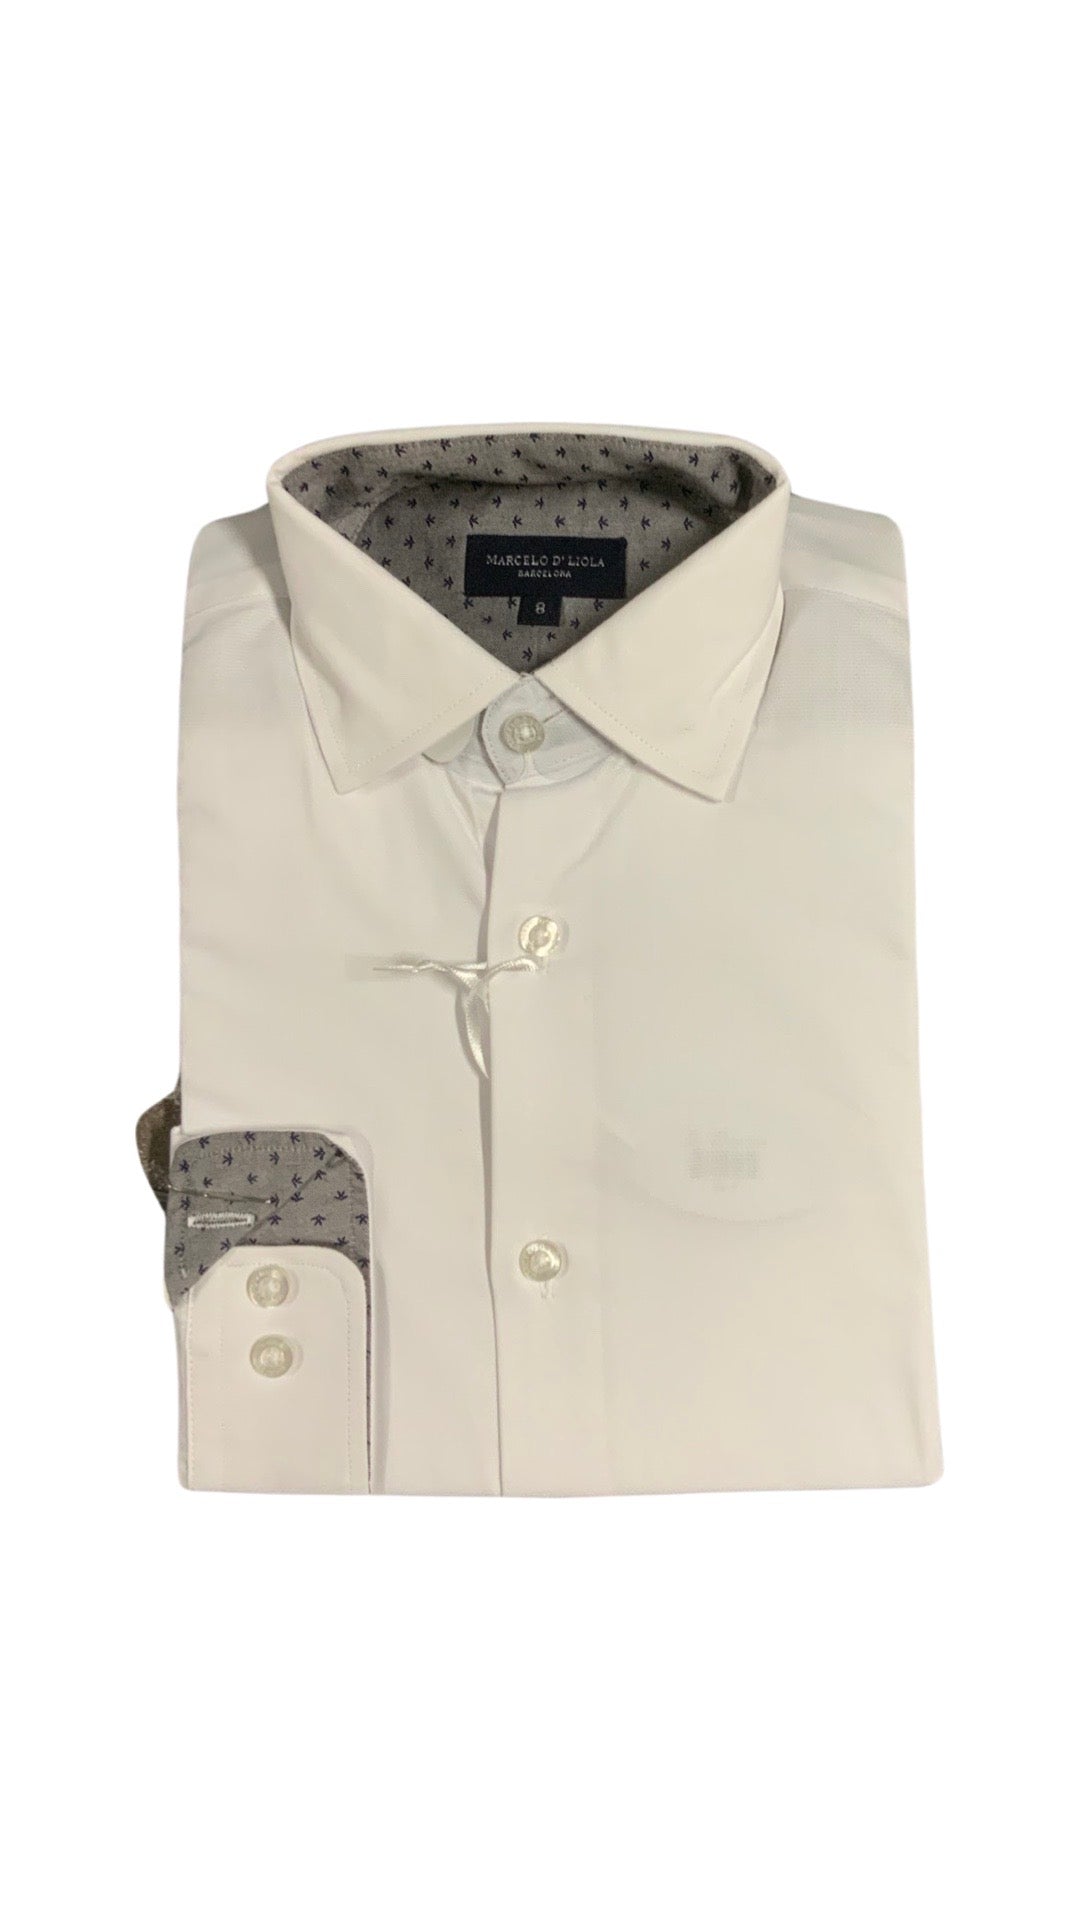 Leo and Zach dress shirt white with navy